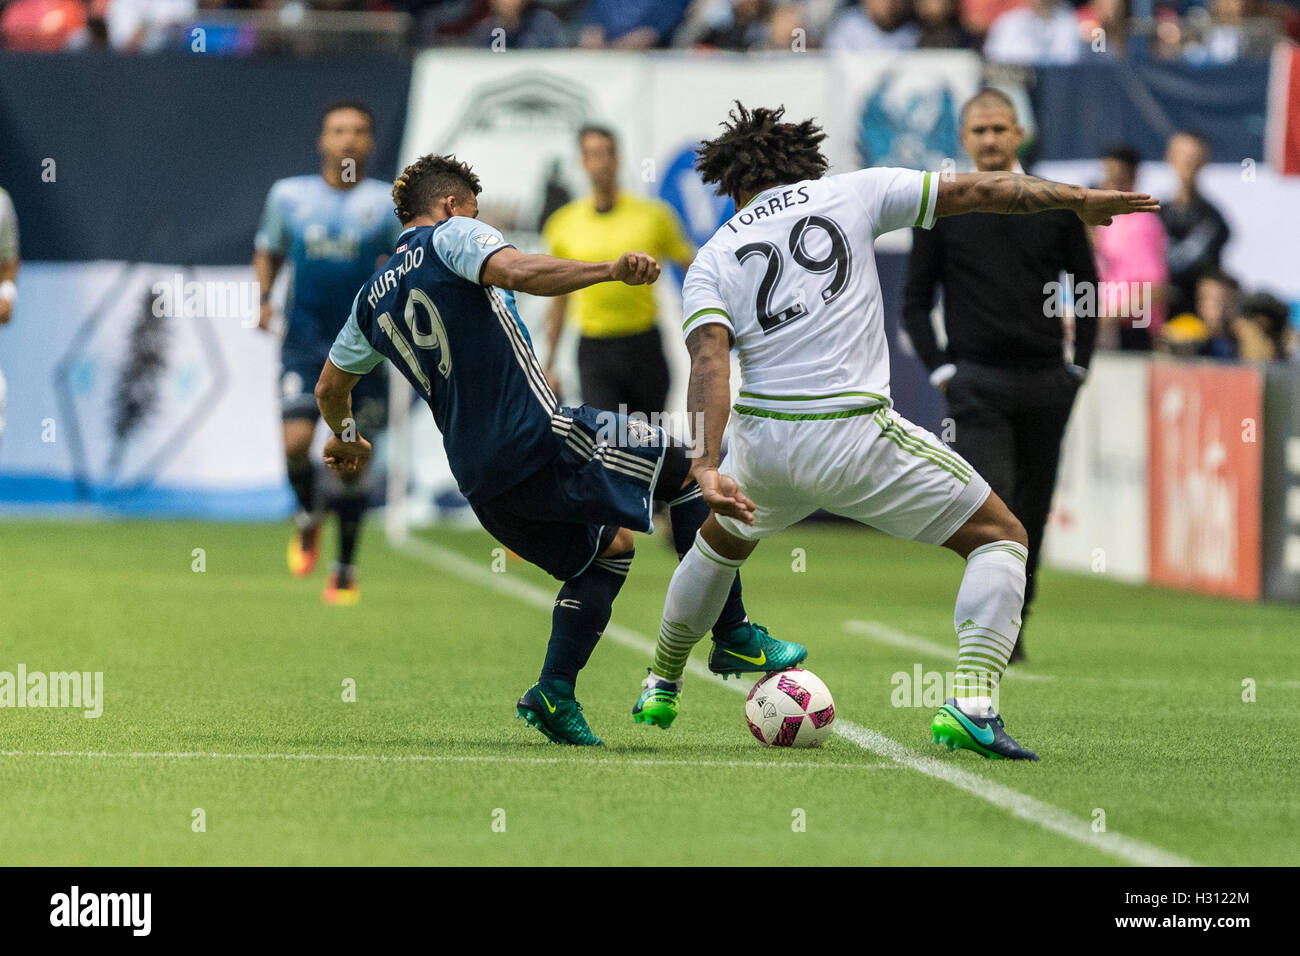 Vancouver, Canada. 2 October 2016. Erik Hurtado (19) of Vancouver Whitecaps and Roman Torres (29) of Seattle Sounders battle for the ball. MLS Vancouver vs Seattle, B.C. Place Stadium. Final score Seattle 2-1. Credit:  Gerry Rousseau/Alamy Live News Stock Photo